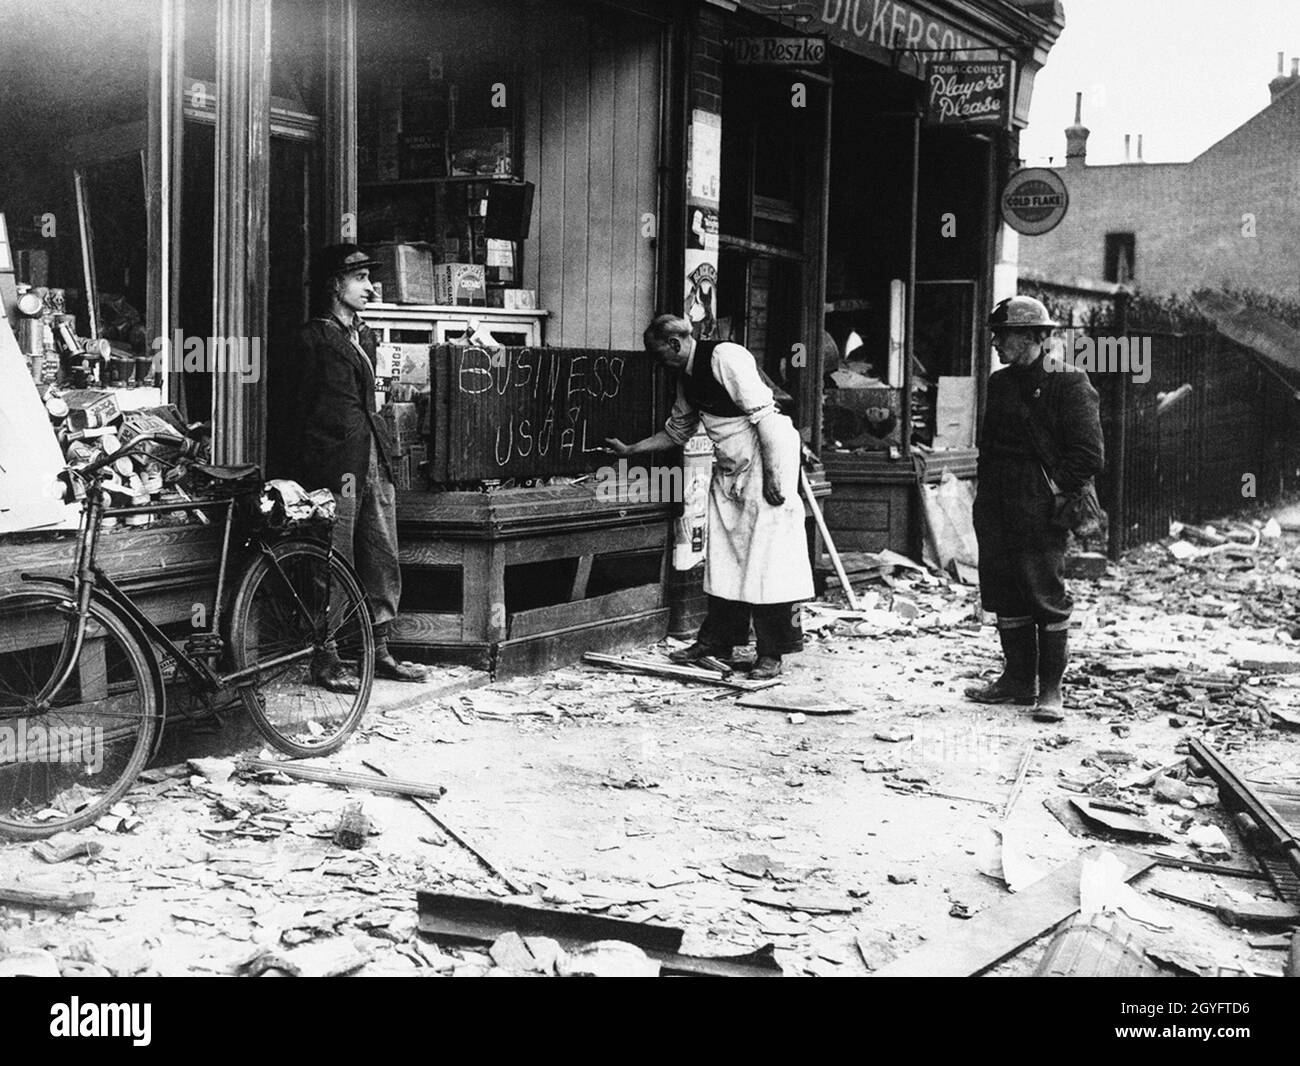 A shopkeeper writing Business As Usual on a blackboard outside his damaged shop in London during the Blitz, England 1940 Stock Photo